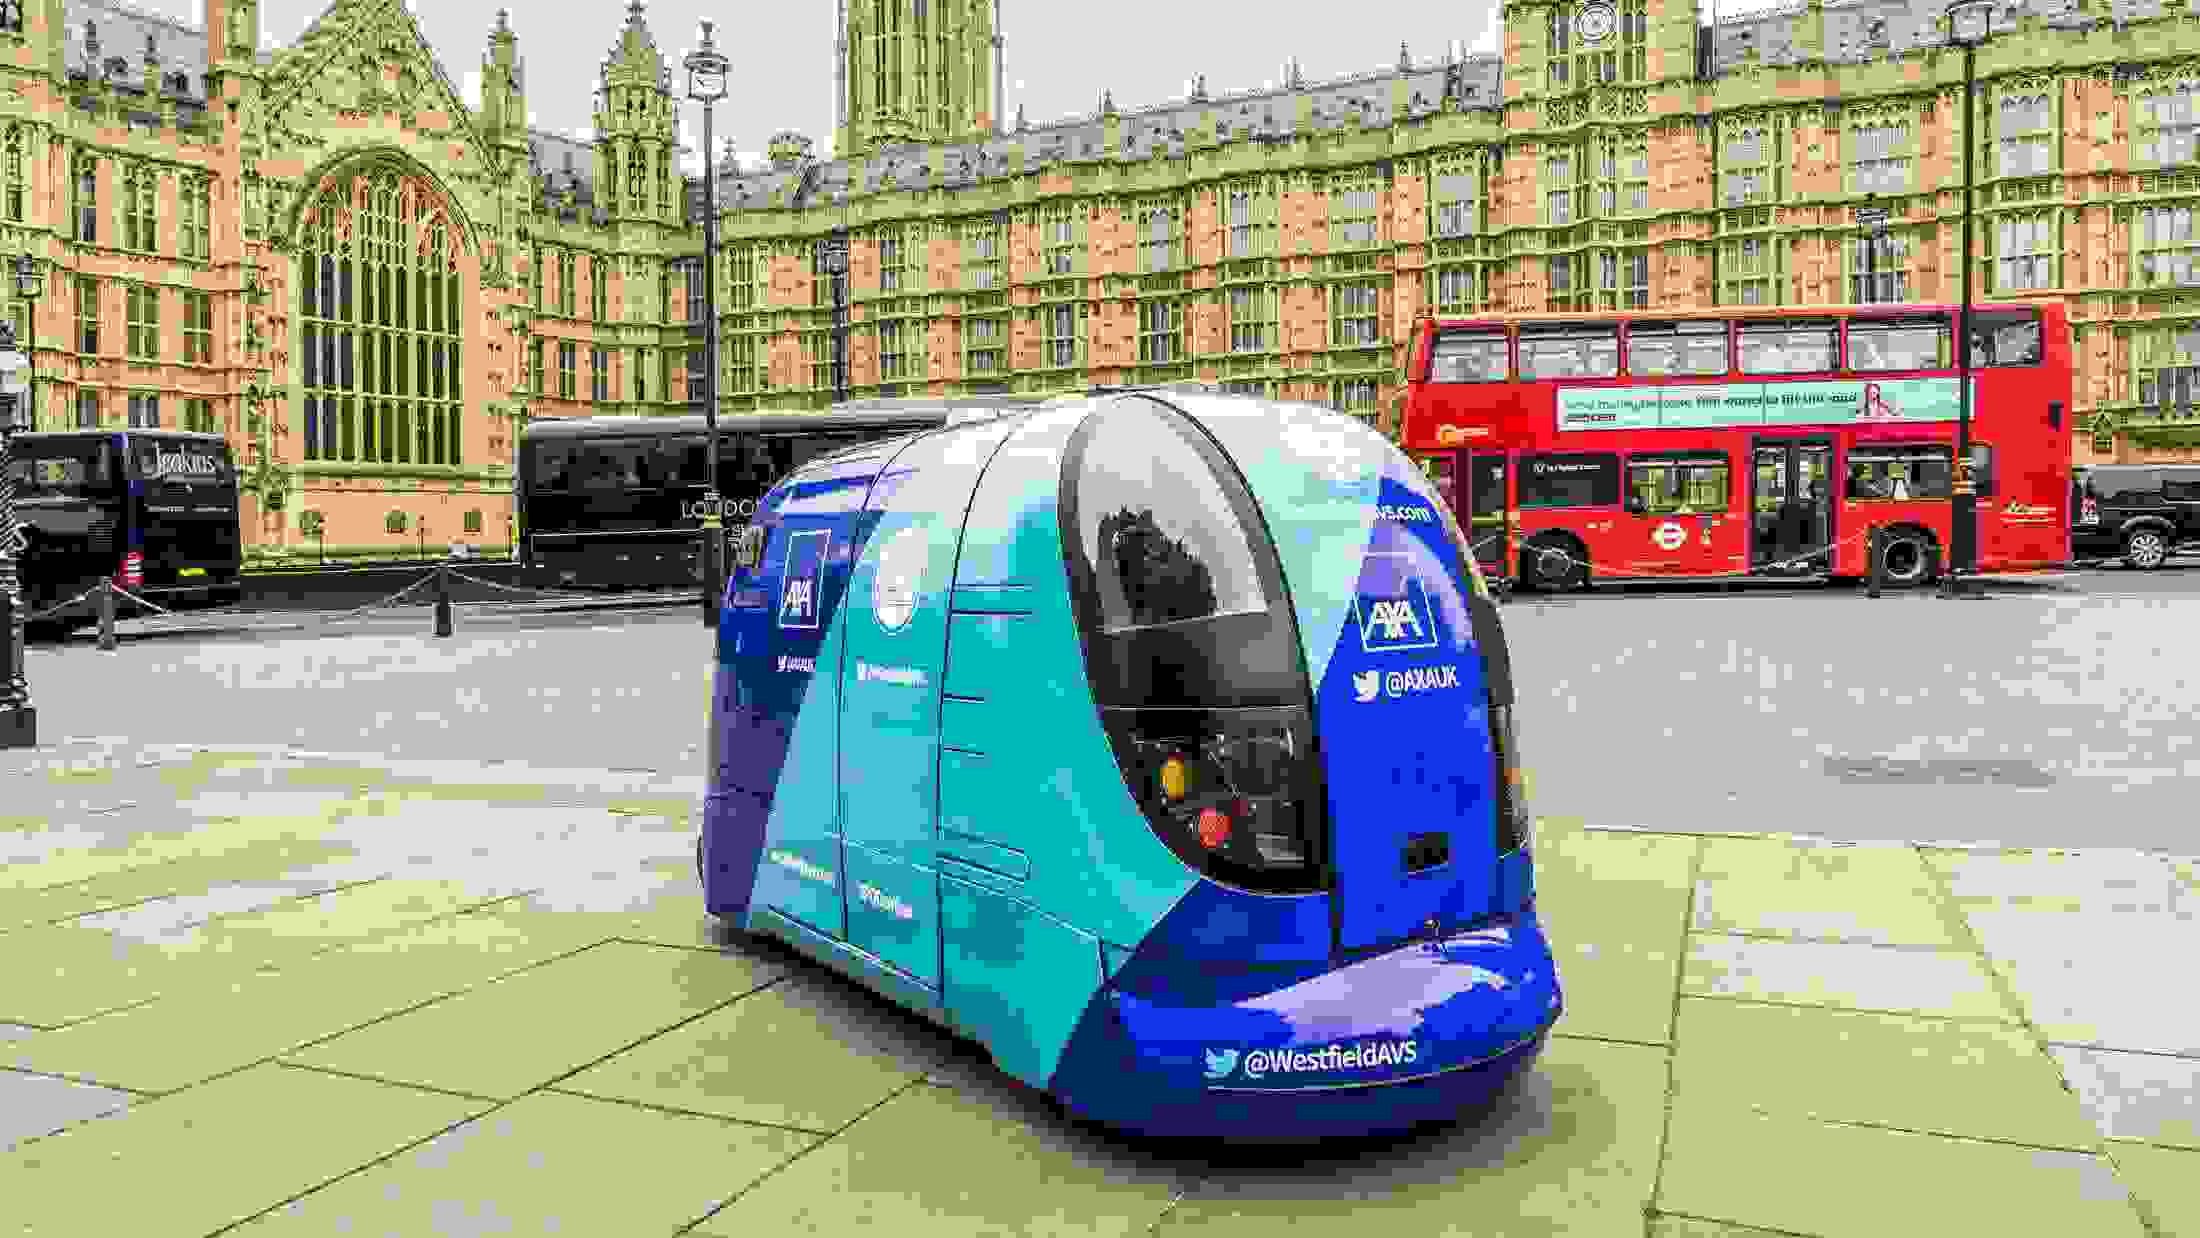 Driverless car outside Houses of Parliament